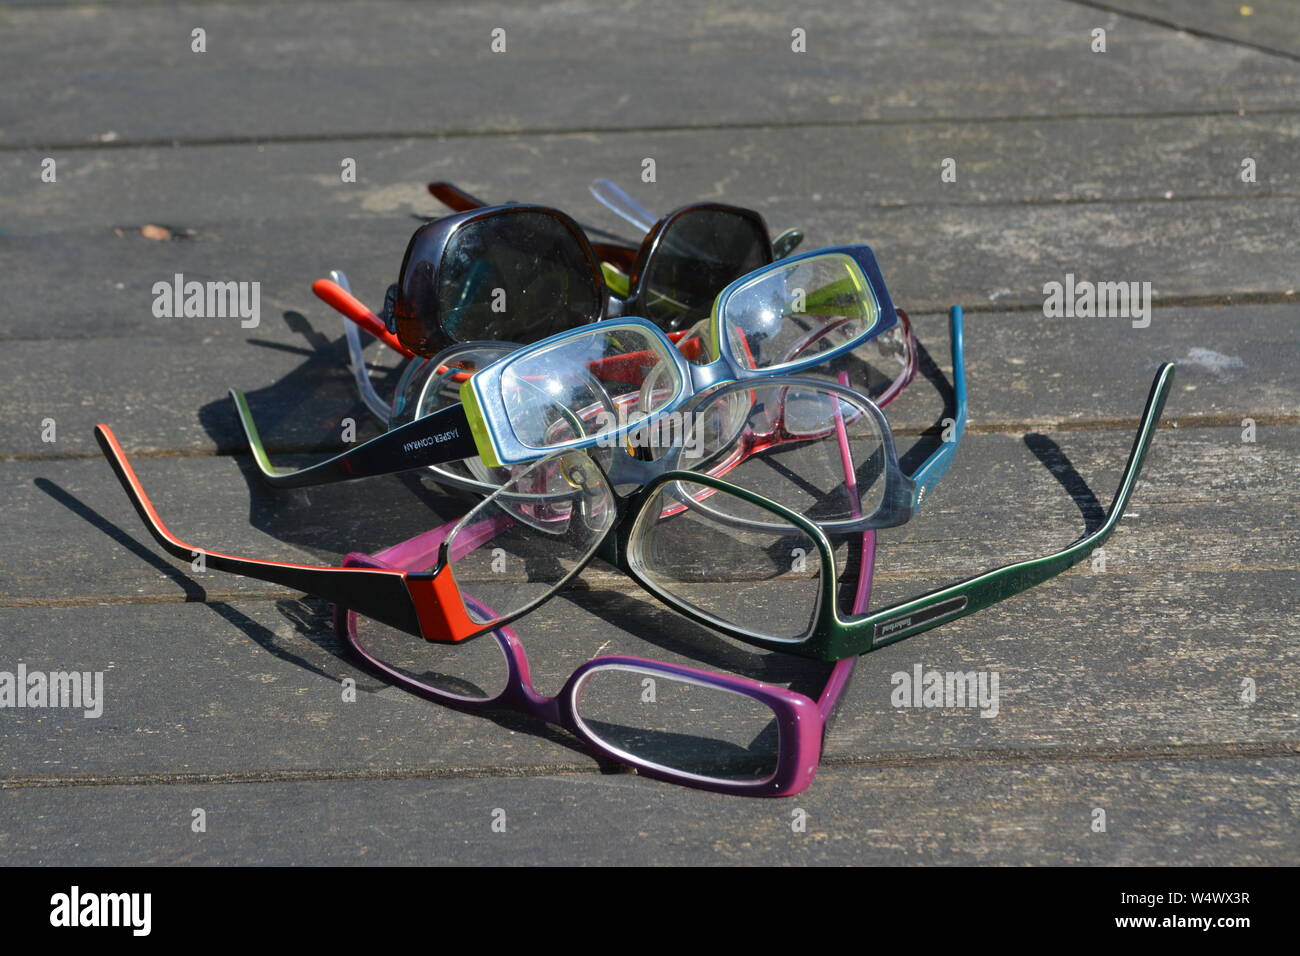 Large number of different framed unfolded spectacles glasses arranged in a random abstract pattern on a wooden slatted surface in bright sunlight Stock Photo